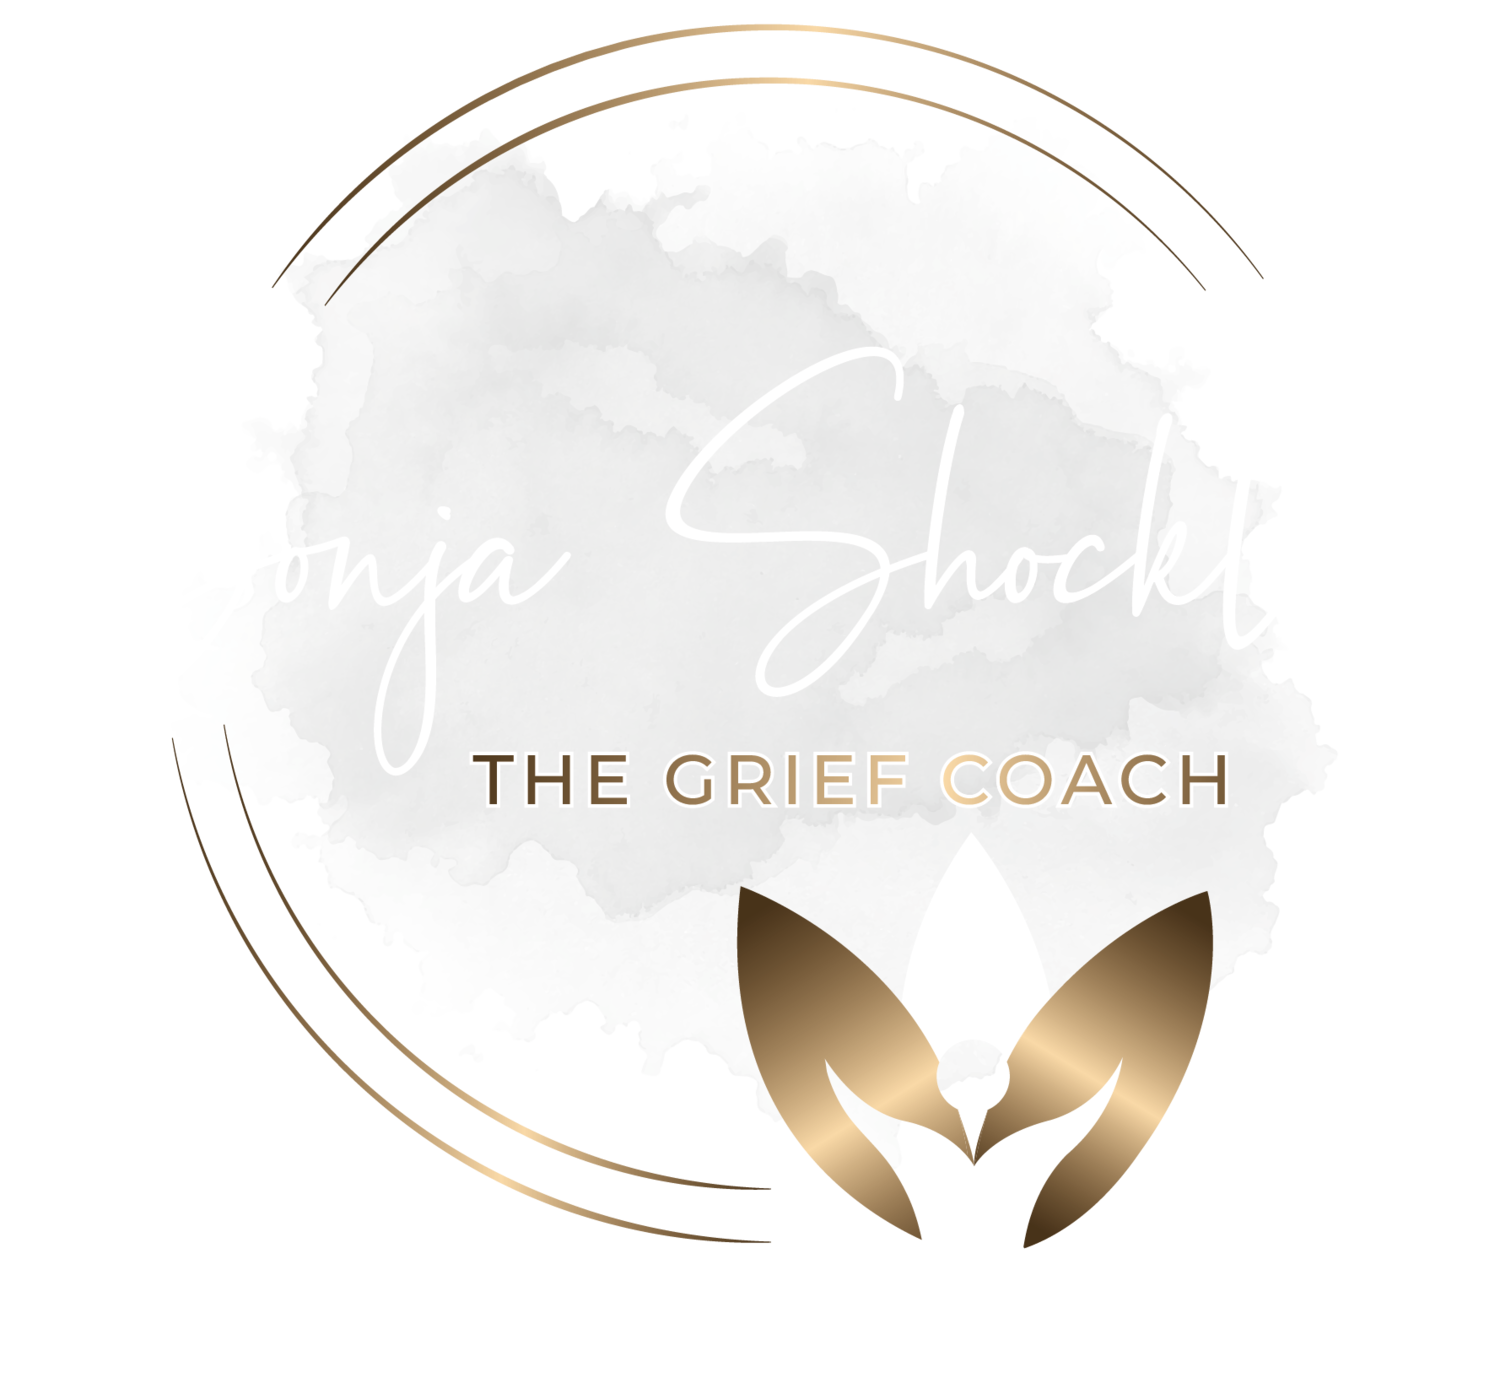 Sonja The Grief Coach | Turning Bitter Into Better | Grief Counseling